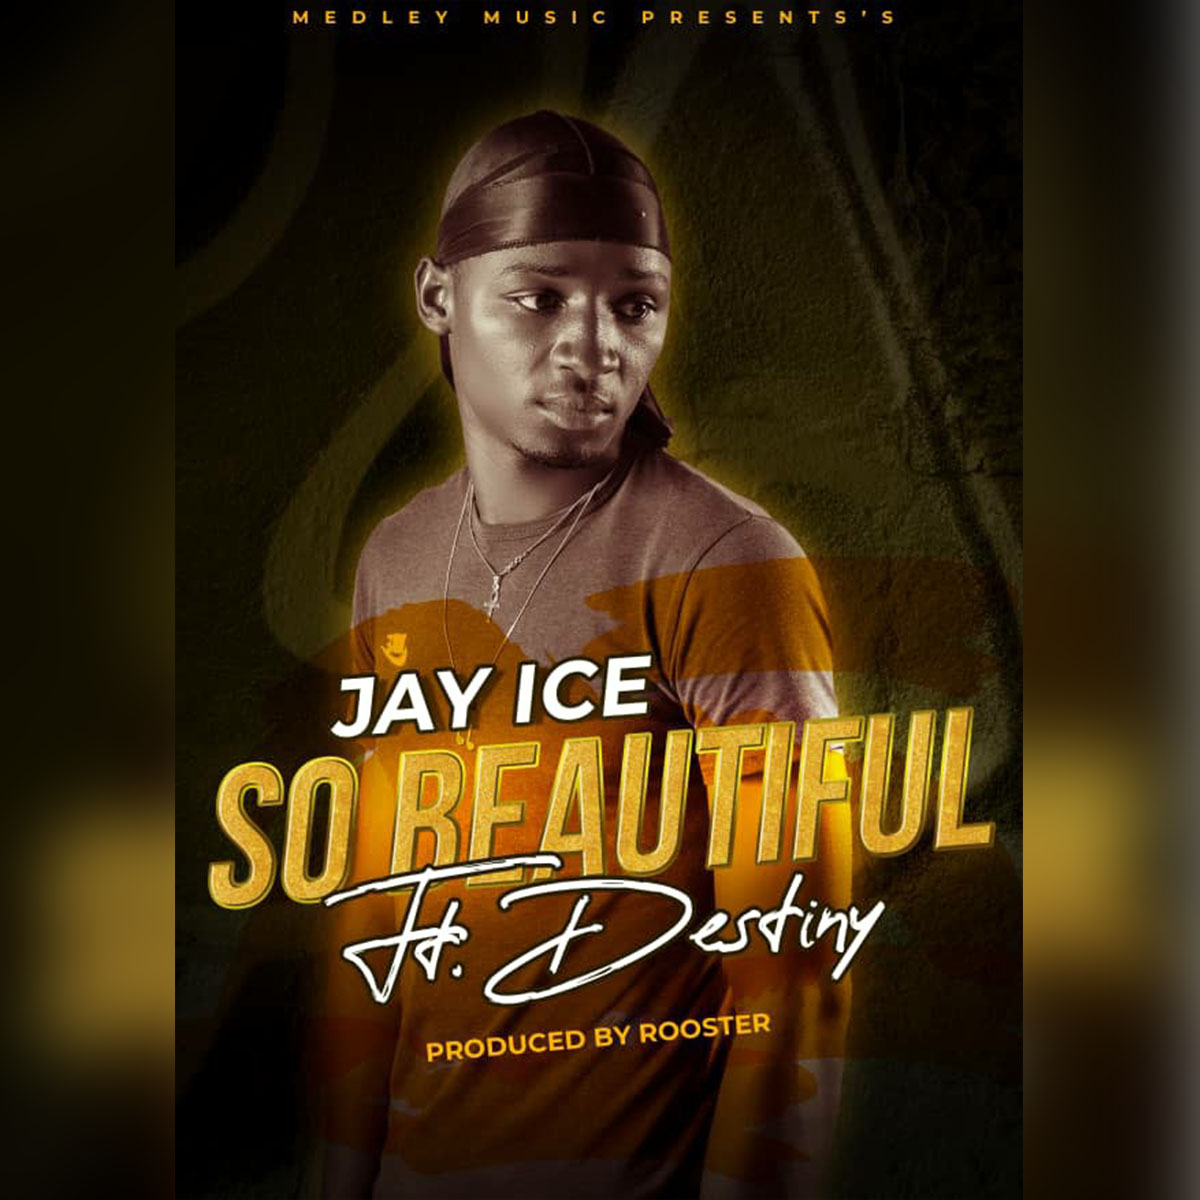 Jay Ice ft. Destiny - So Beautiful (Prod. Rooster)